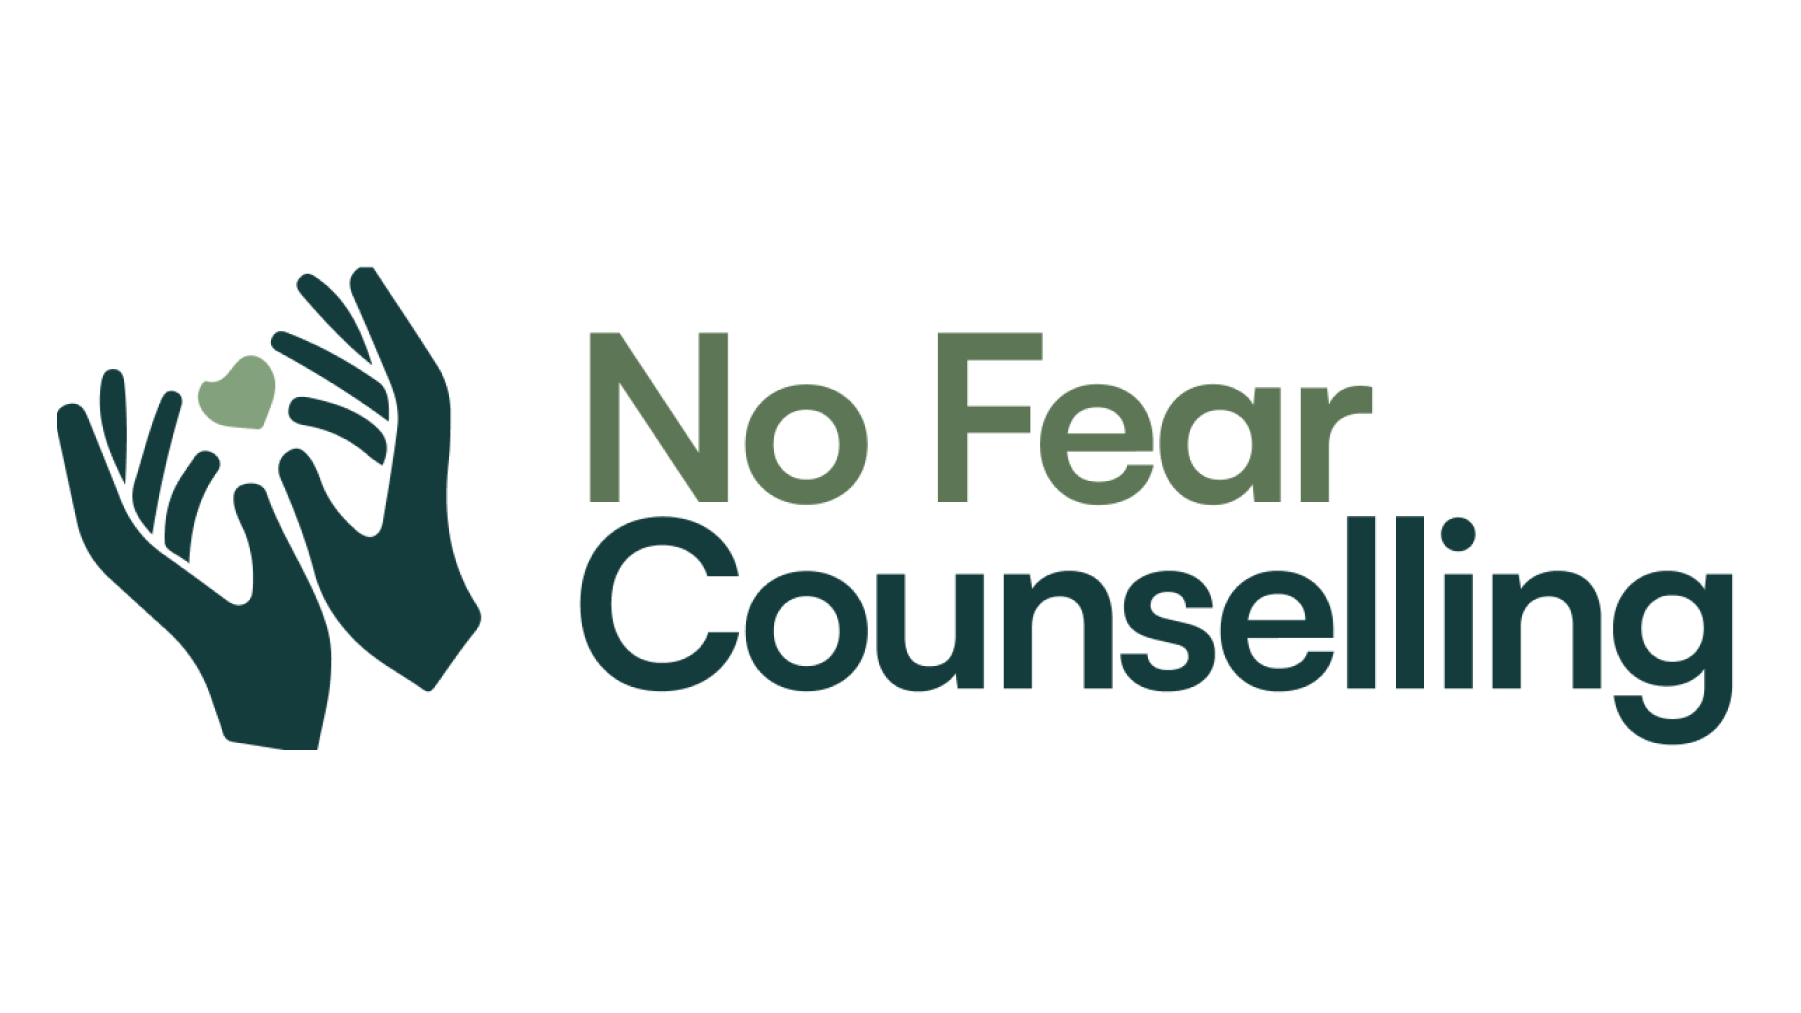 www.nofearcounselling.com